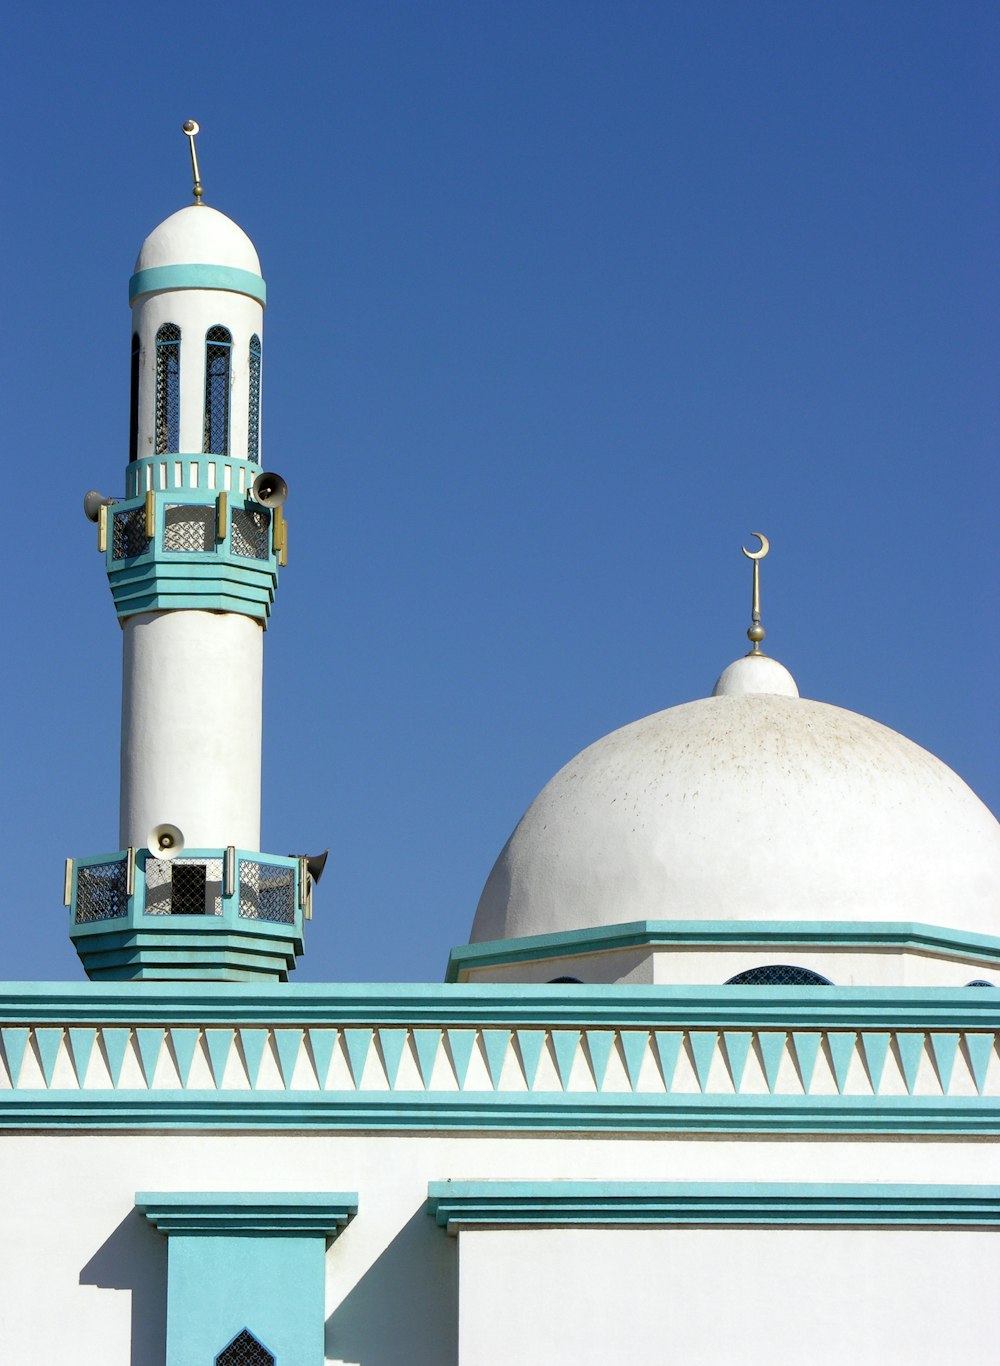 white and green dome building under blue sky during daytime